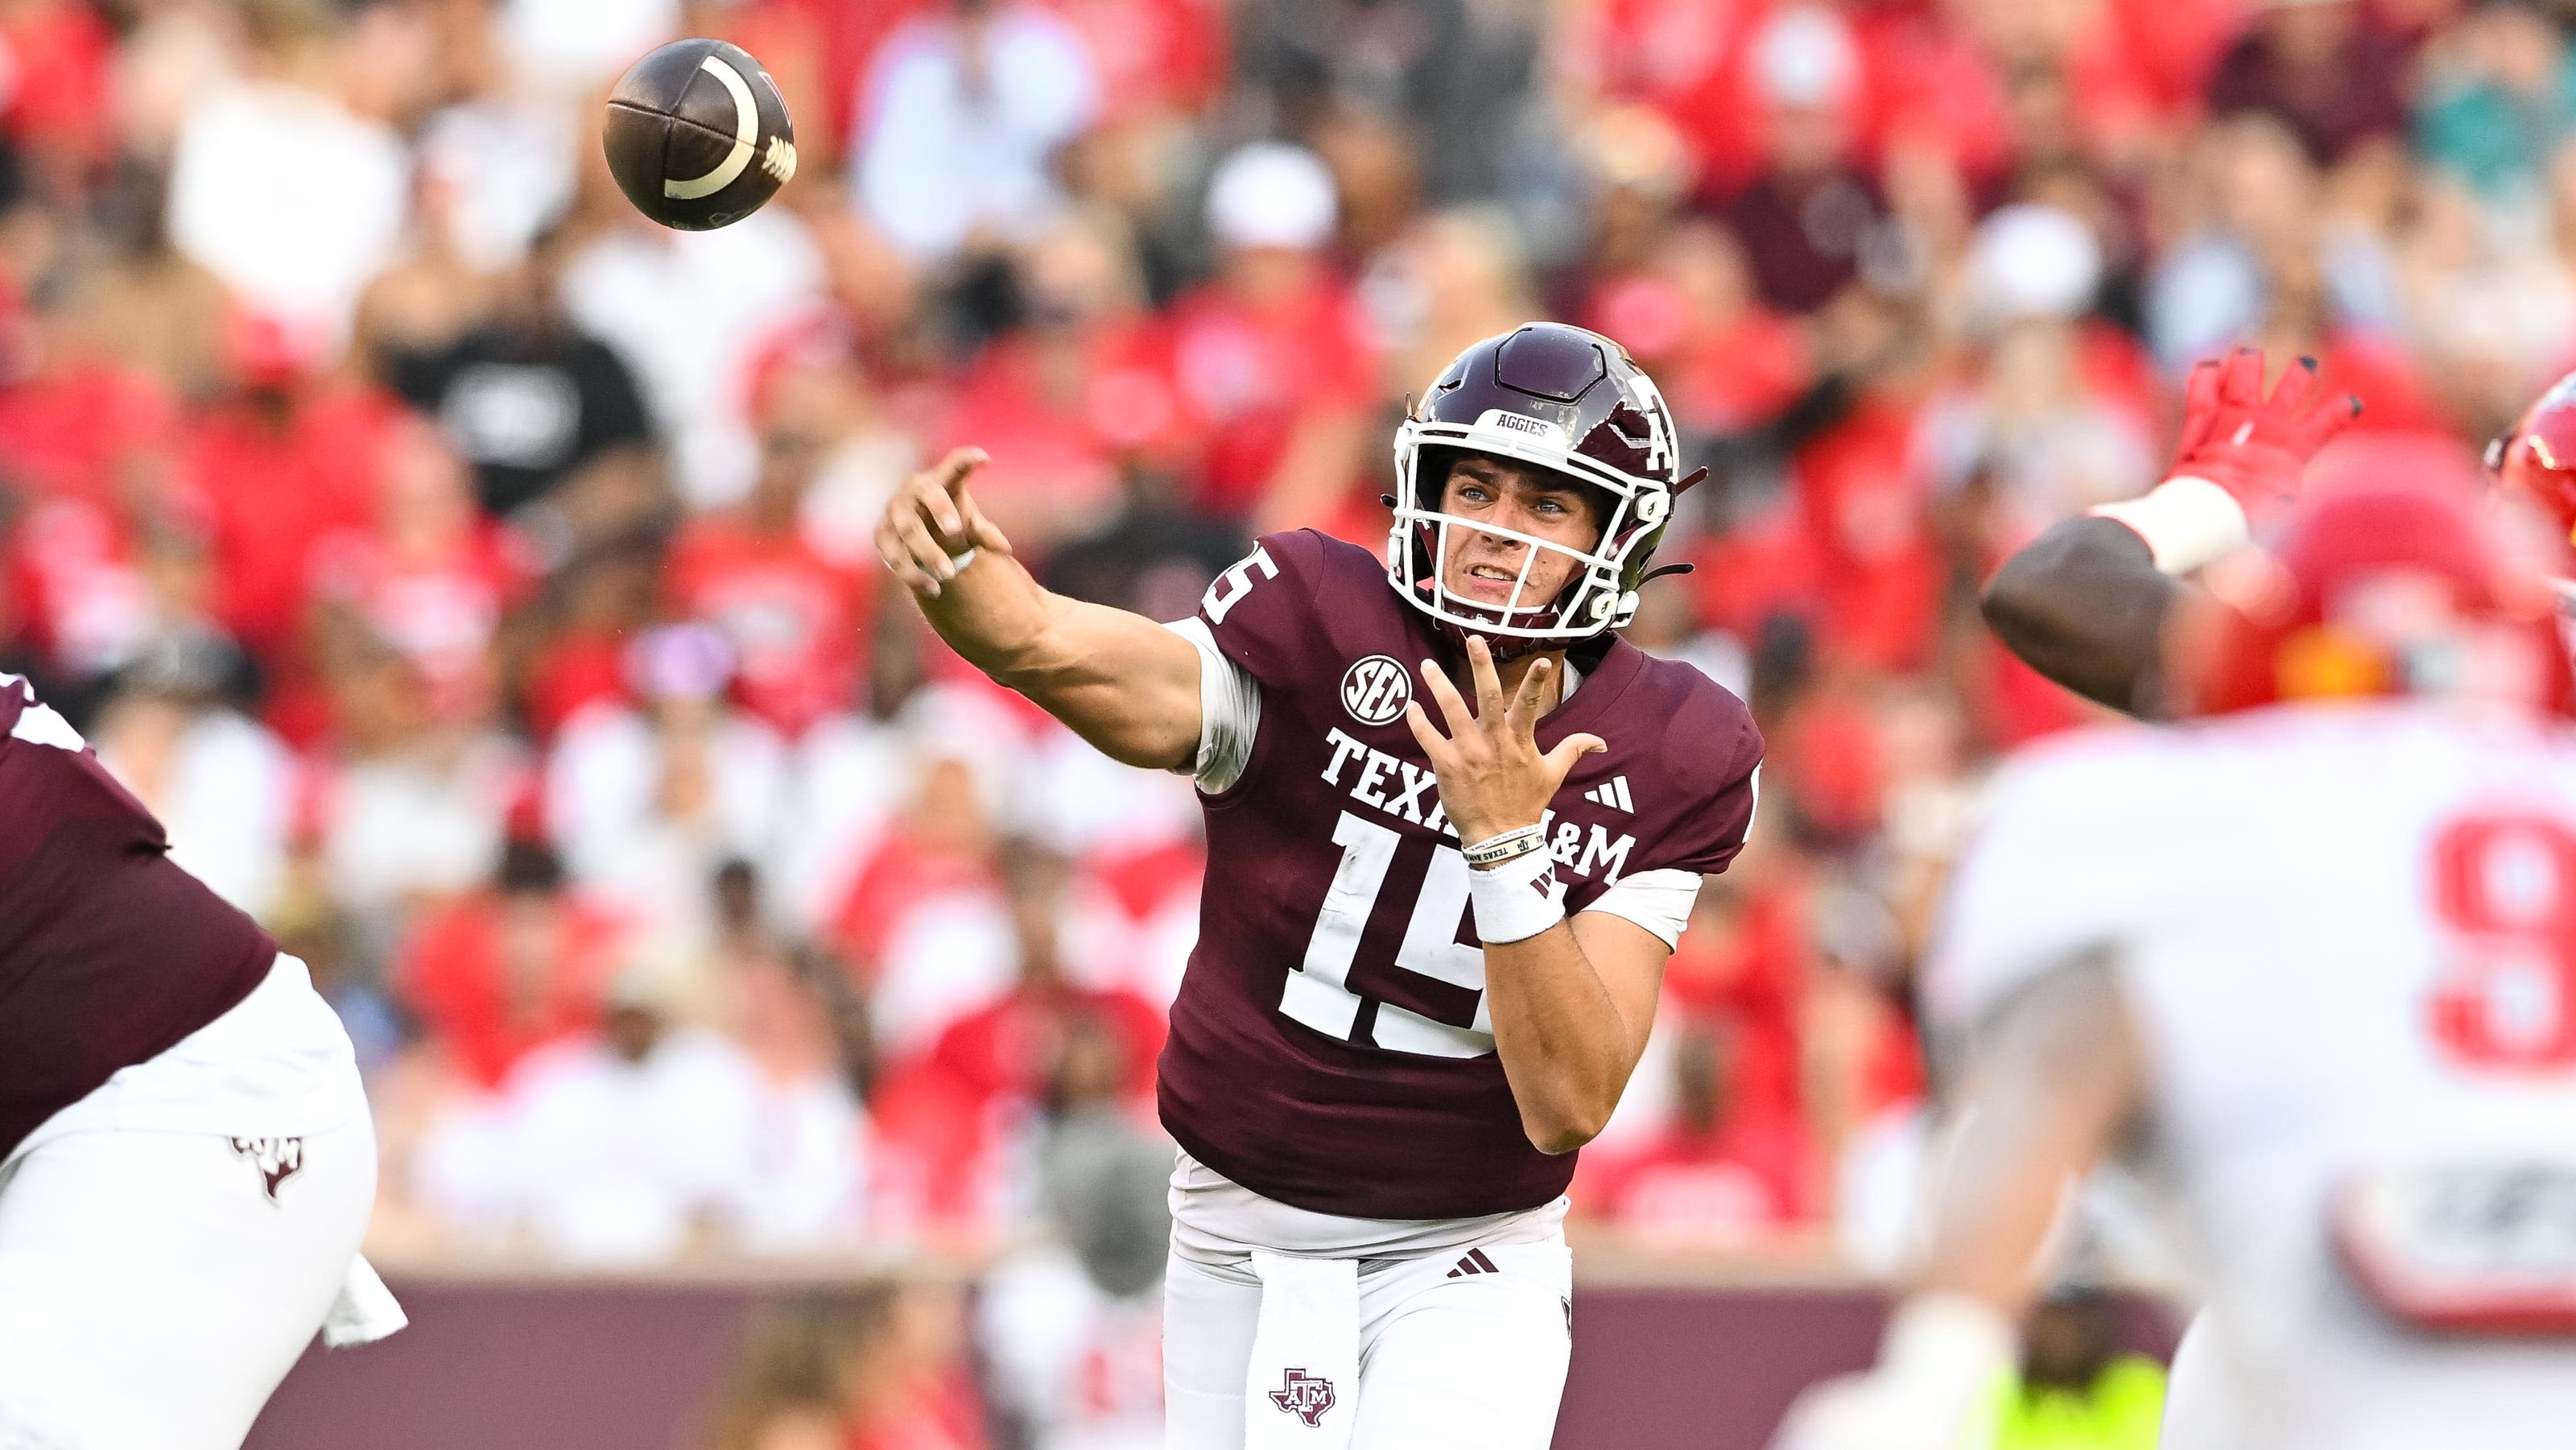 Missouri football opponent preview: Why Texas A&M could be among MU's most important games